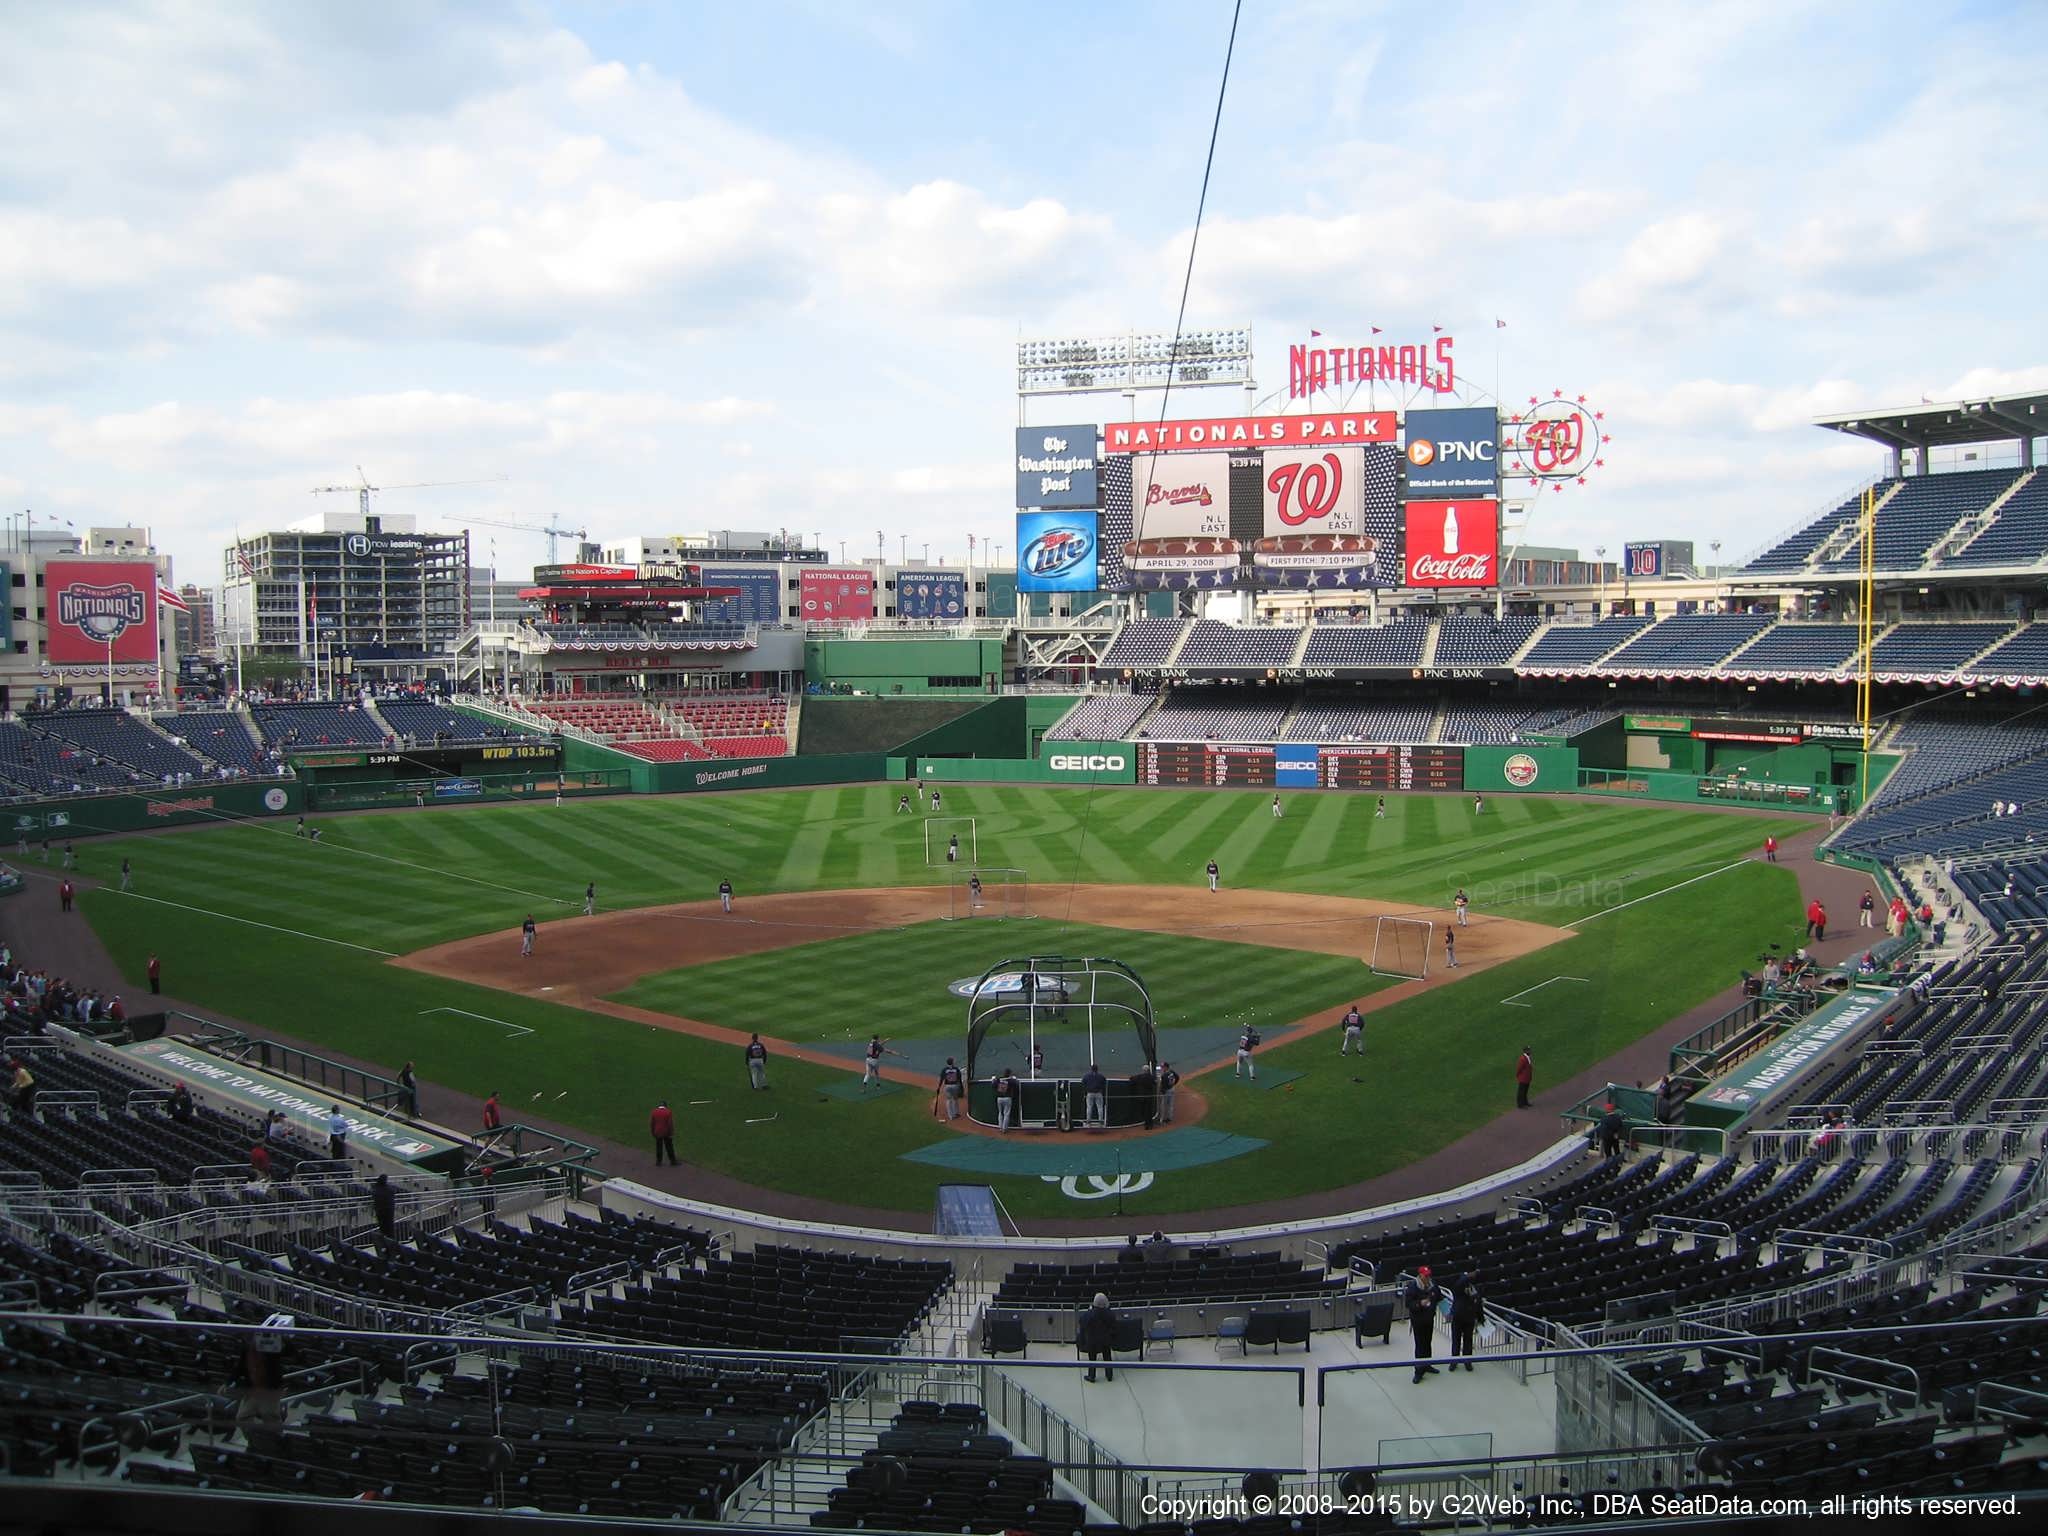 2048x1536 Nationals Park Seating View from Section 213